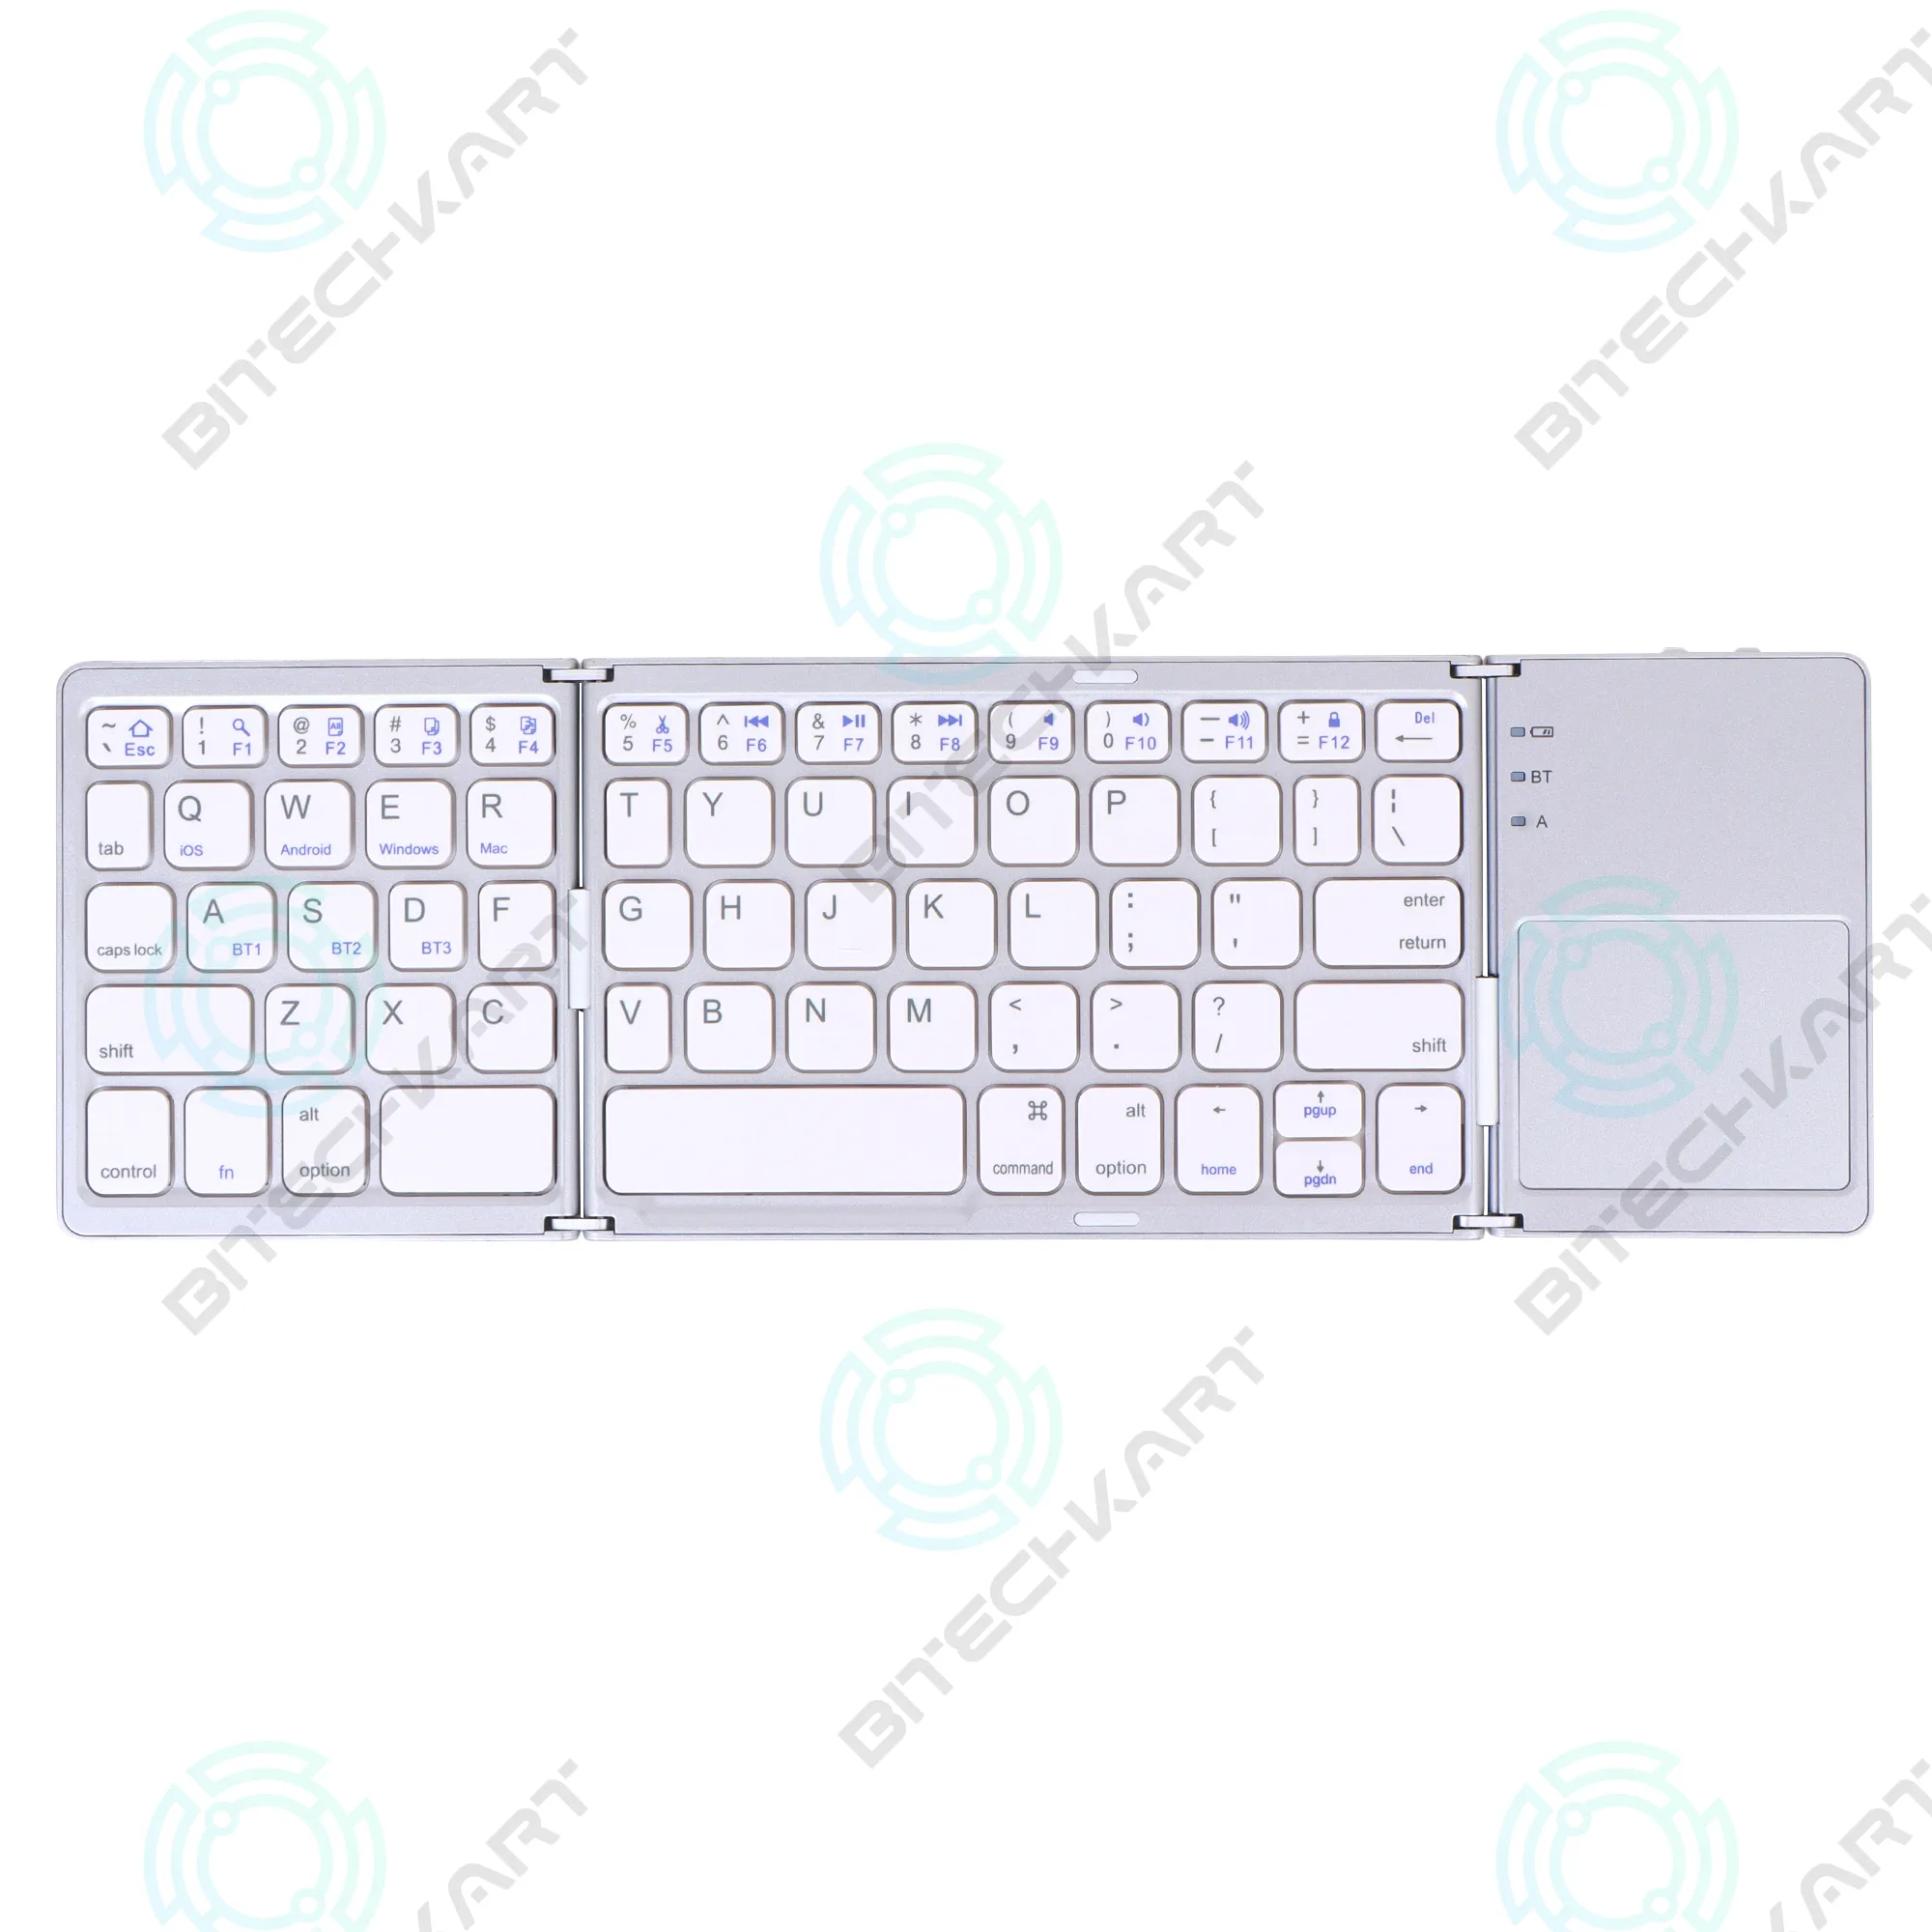 Foldable Multi-device Bluetooth Keyboard with Touchpad - Silver